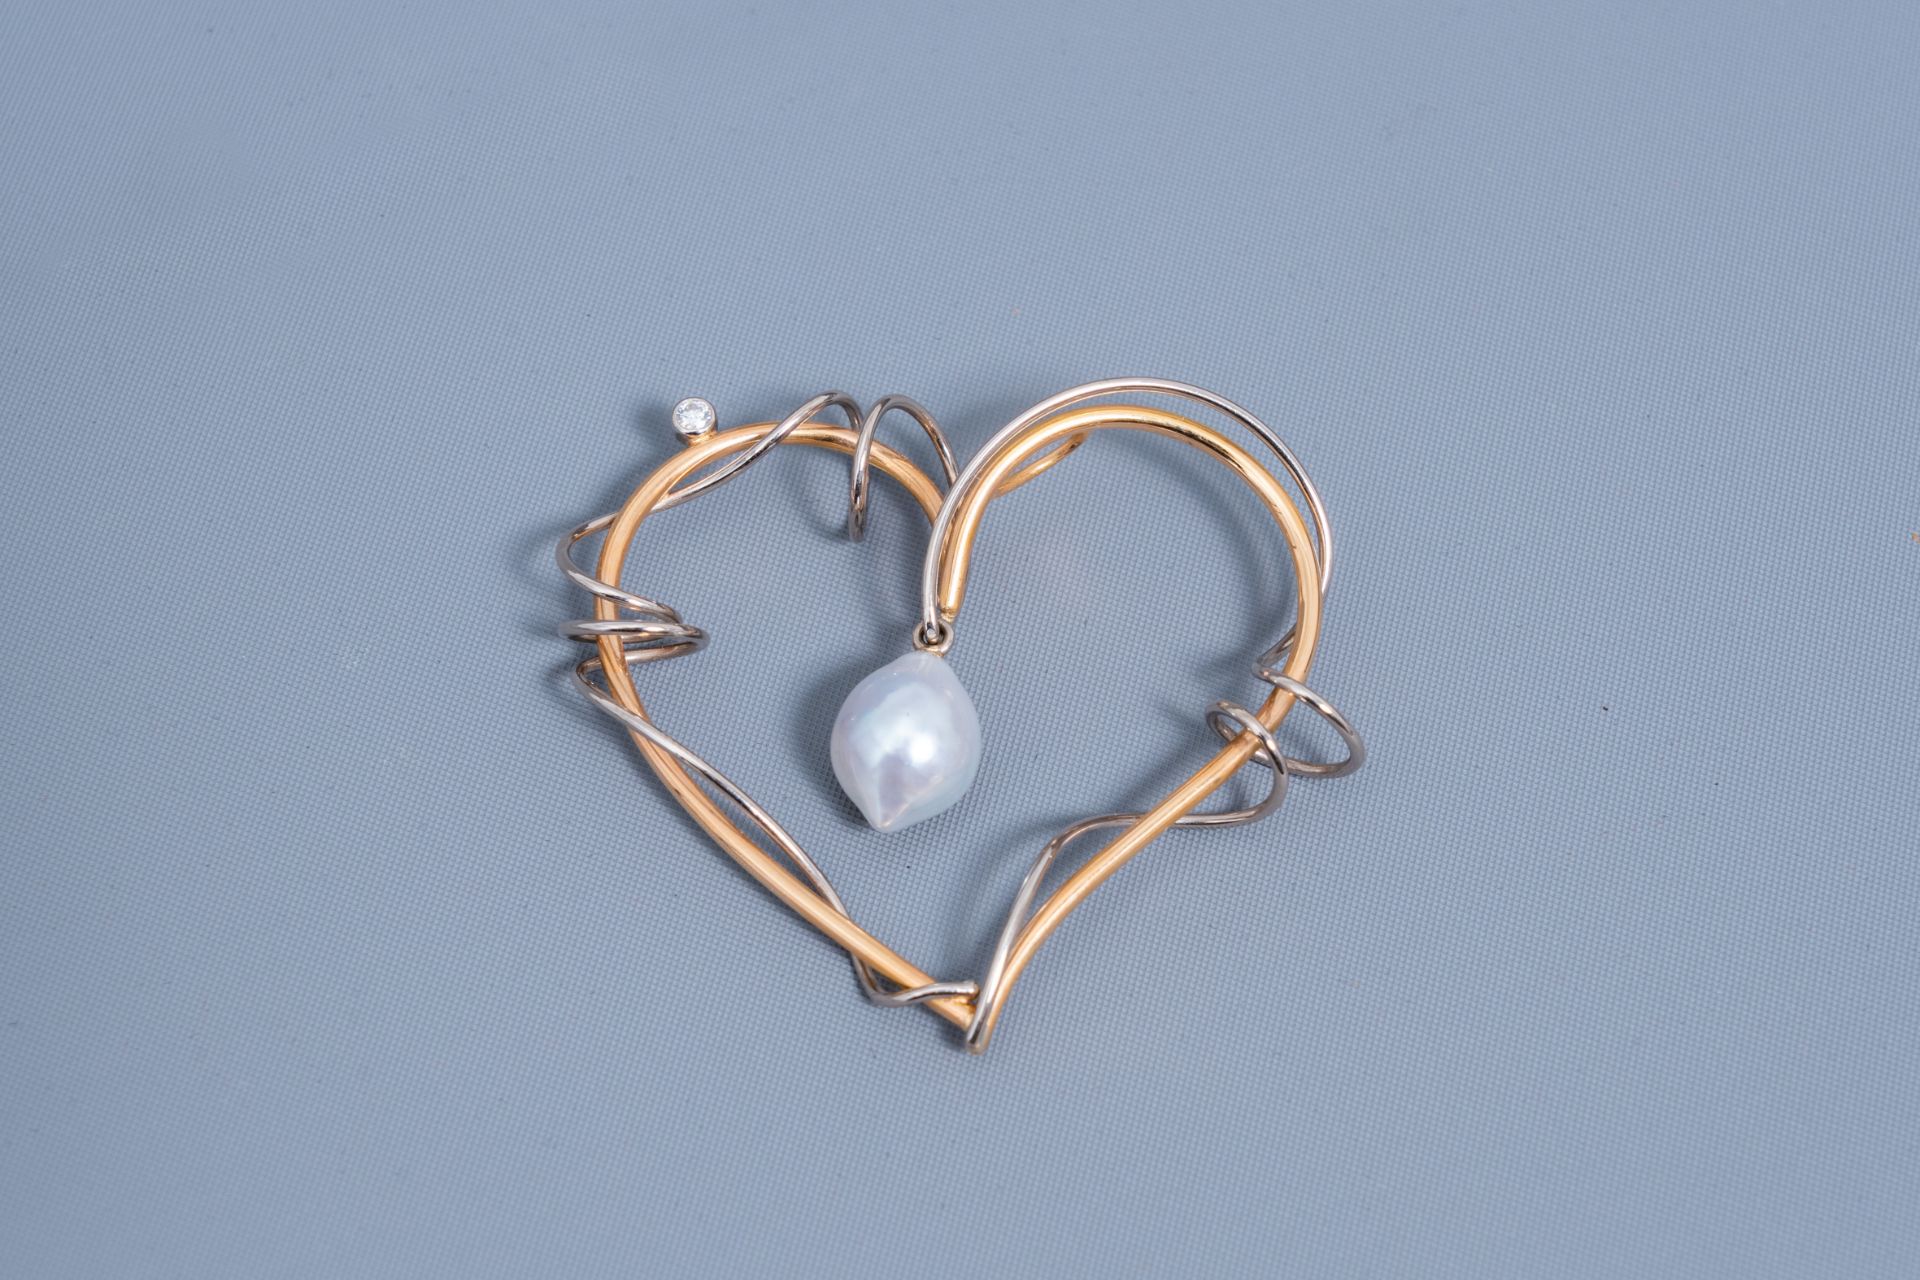 An 18 carat white and yellow heart-shaped pendant set with a diamond and a white South Sea pearl, 20 - Image 2 of 3